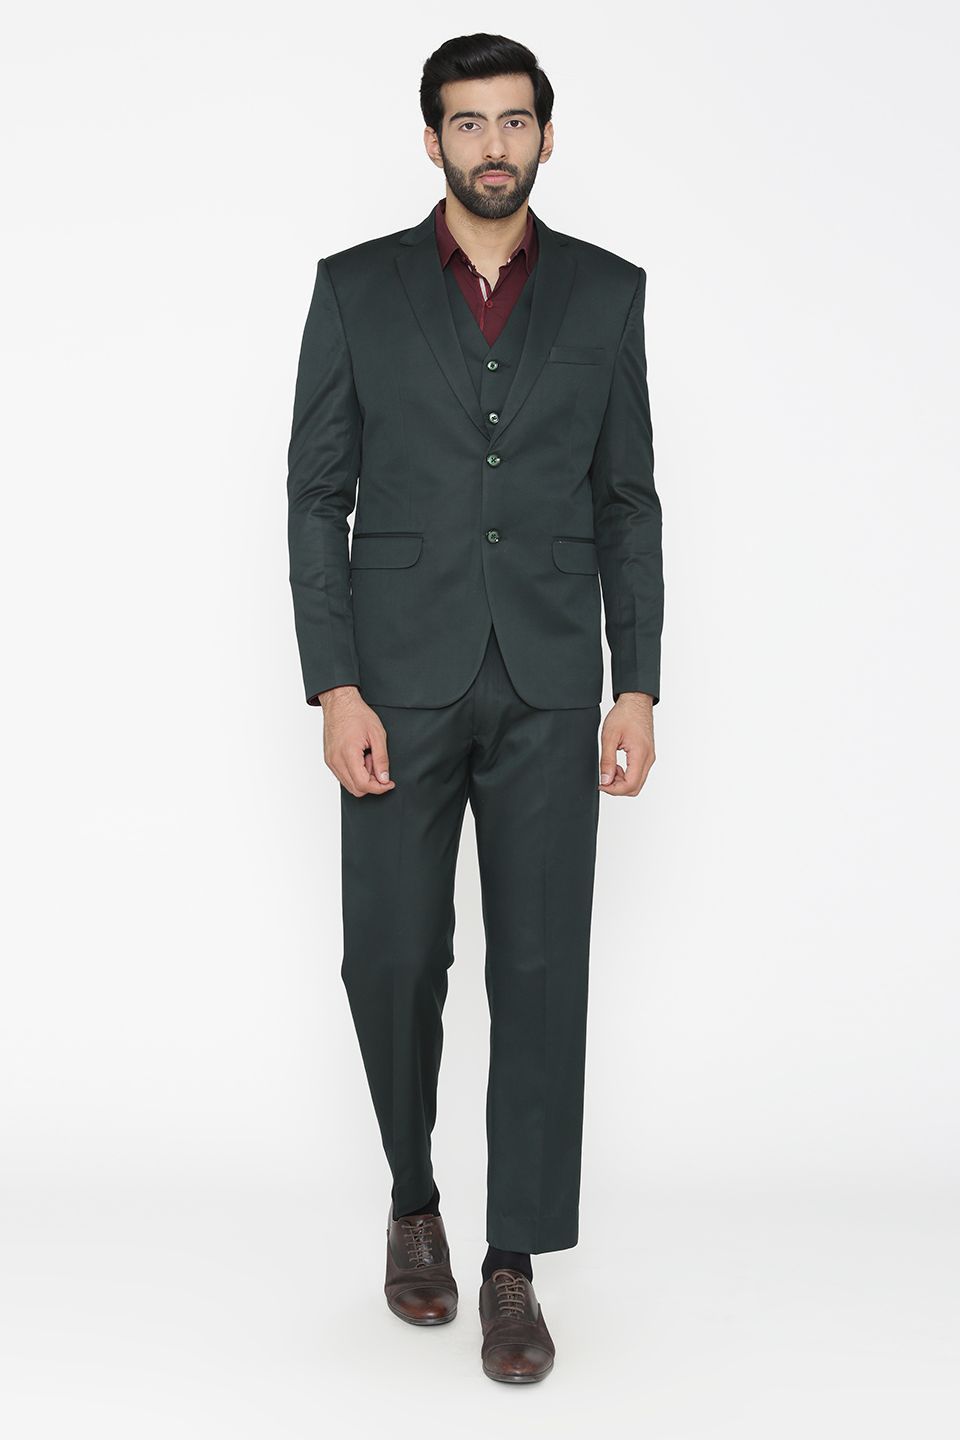 Polyester Cotton Green Suit